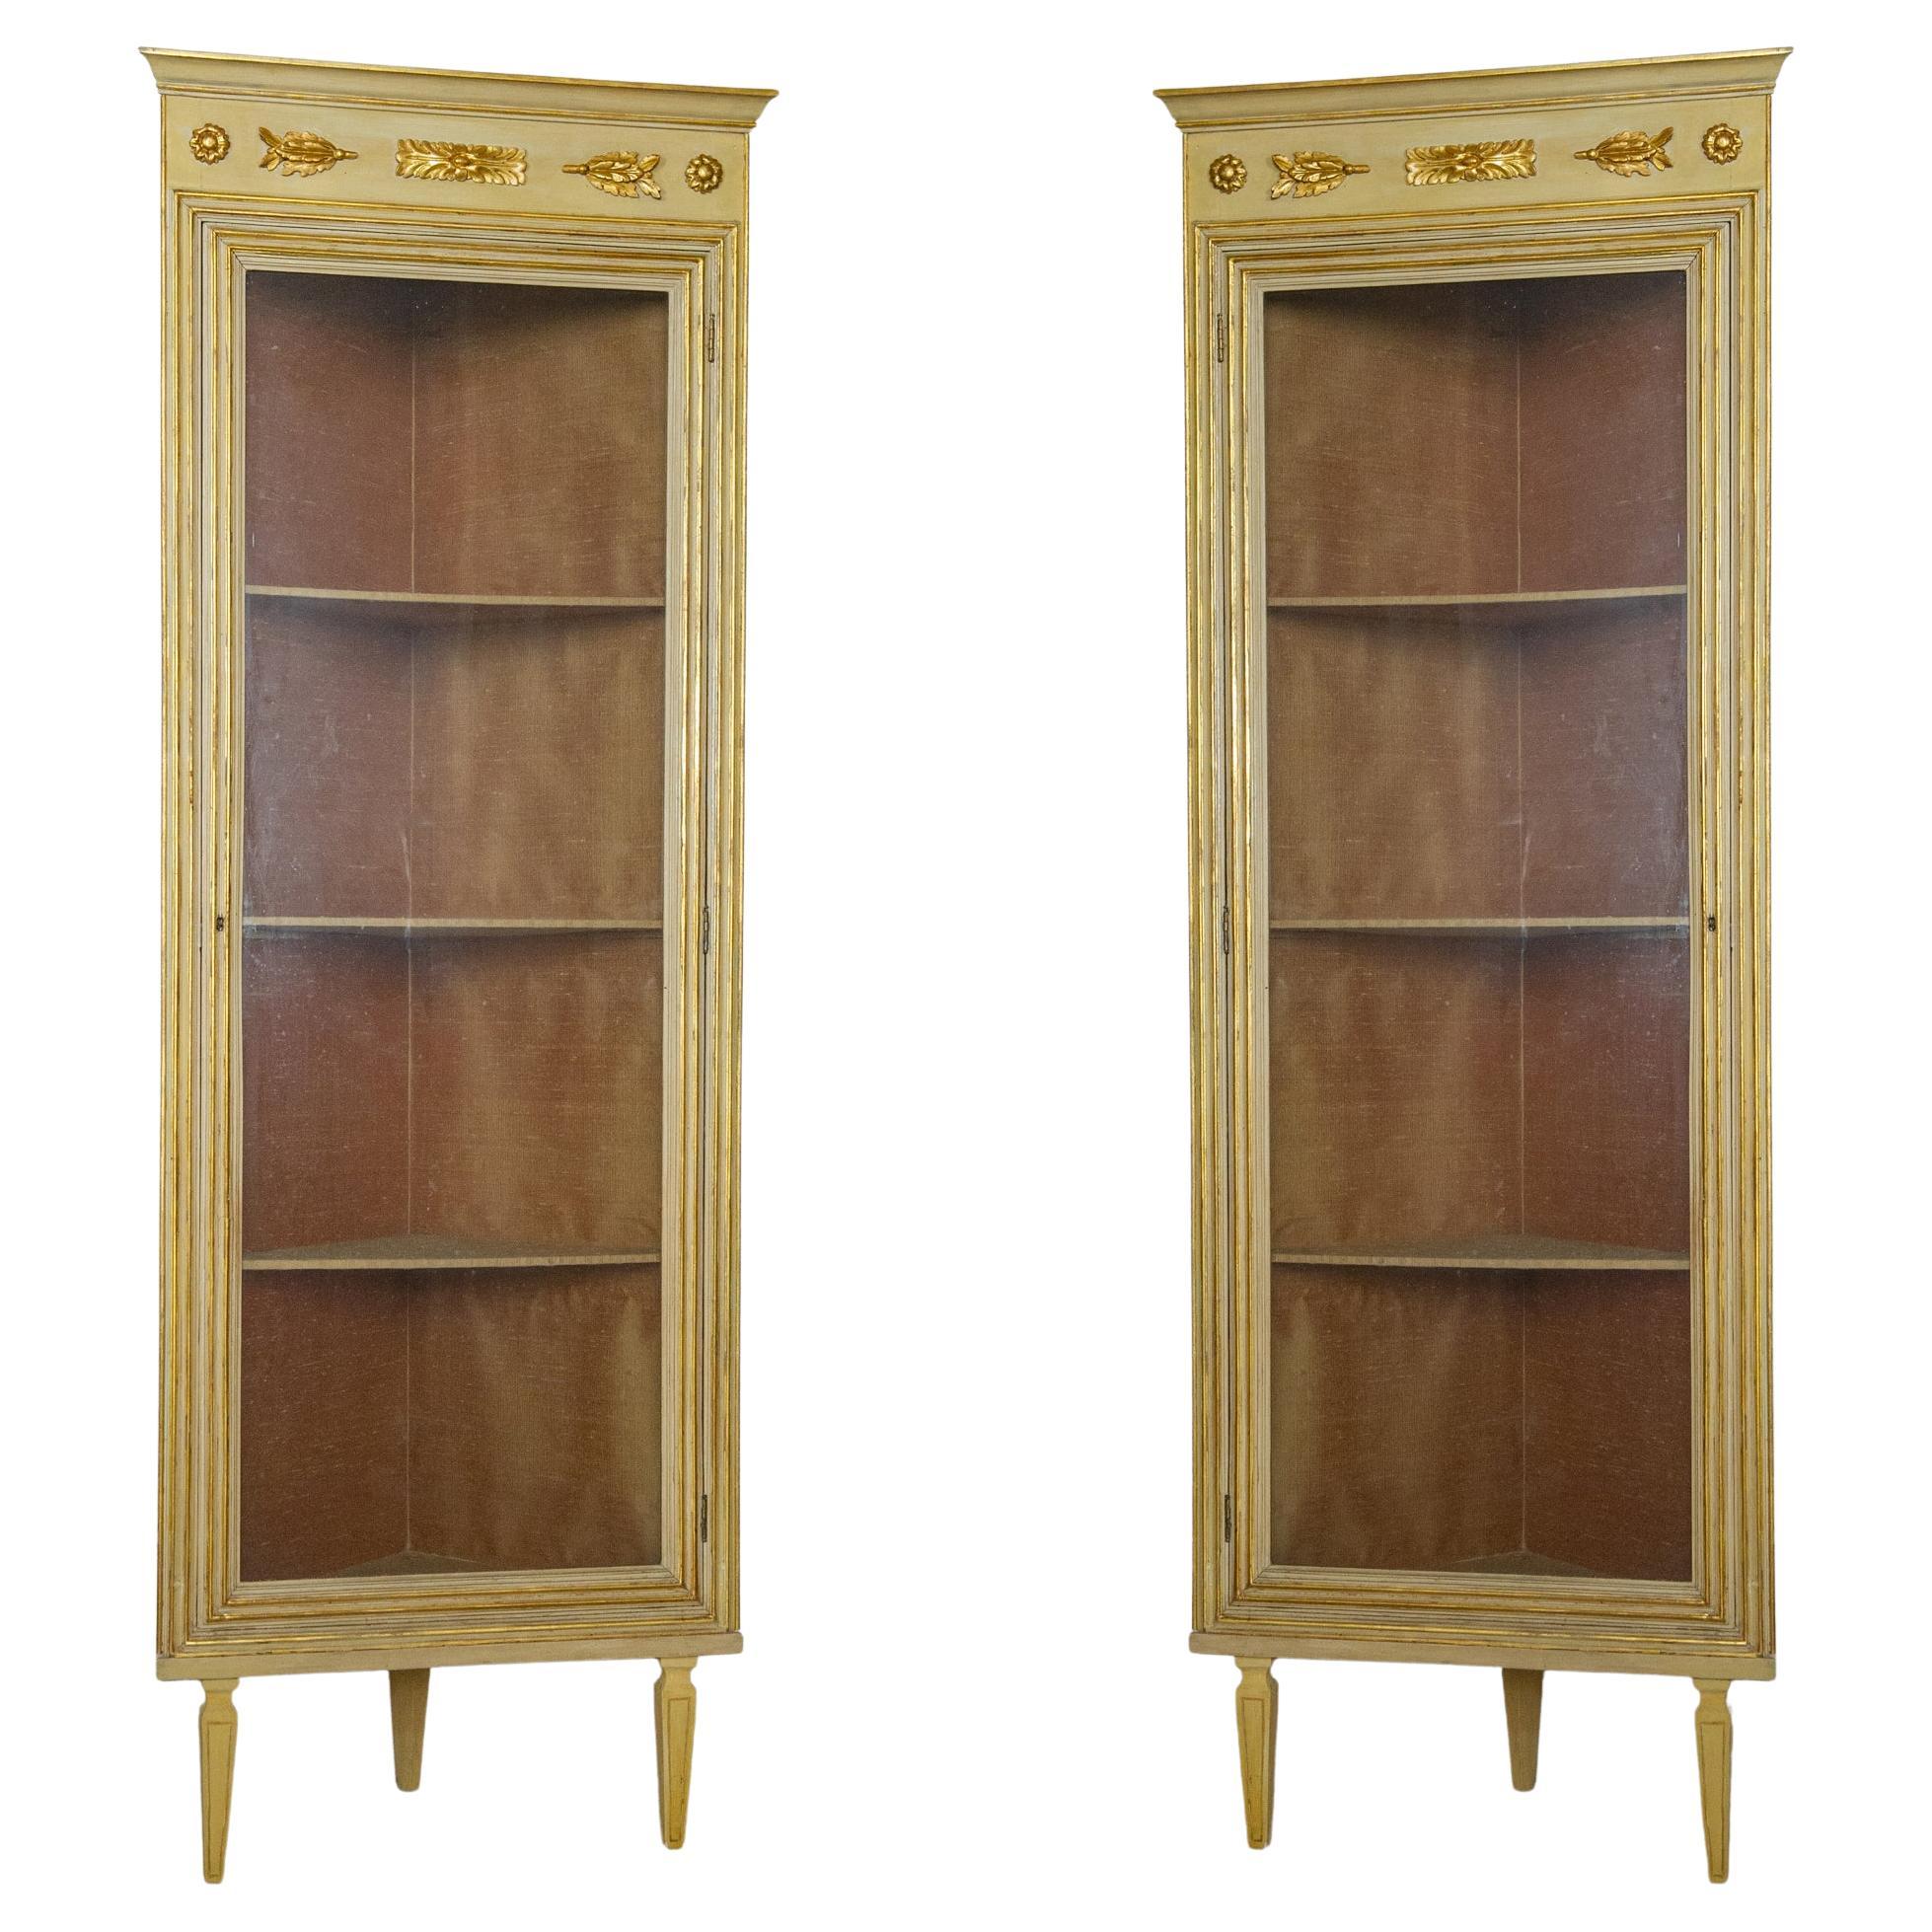 Pair of Antique Corner Lacquered Cabinets with Glass on Doors For Sale